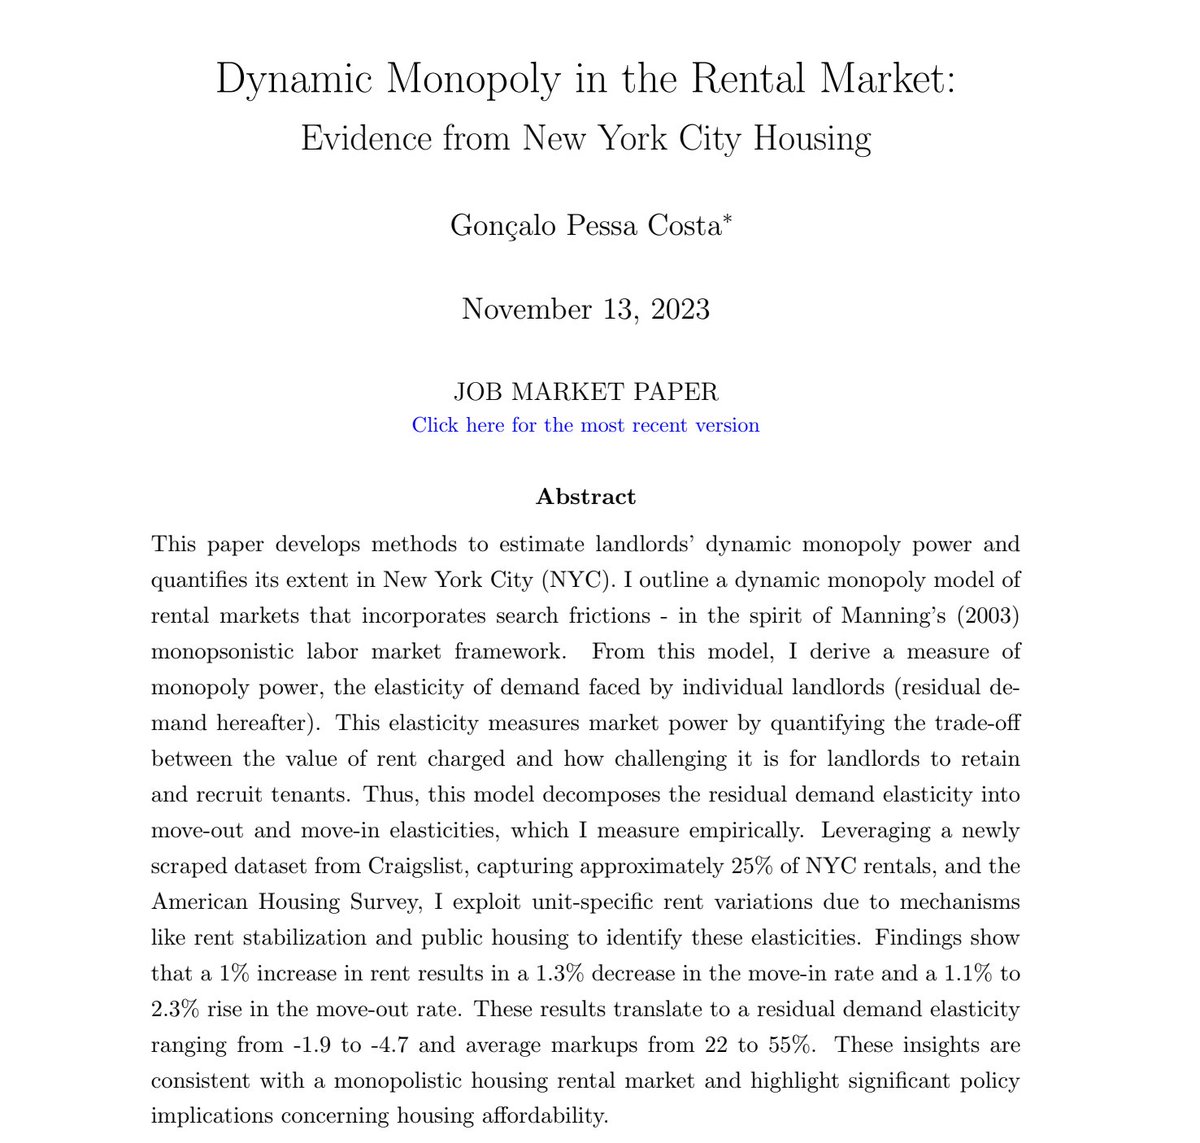 My Job Market Paper Insights 1️⃣ The harder it is to move for a tenant (search is costly) ➡️The more a landlord can hike rents 2️⃣ Rents and moving rates give us a measure of landlord’s mkt power 3️⃣ NYC landlords set rents 22-55% over costs shorturl.at/kzU08 #EconTwitter 1/9